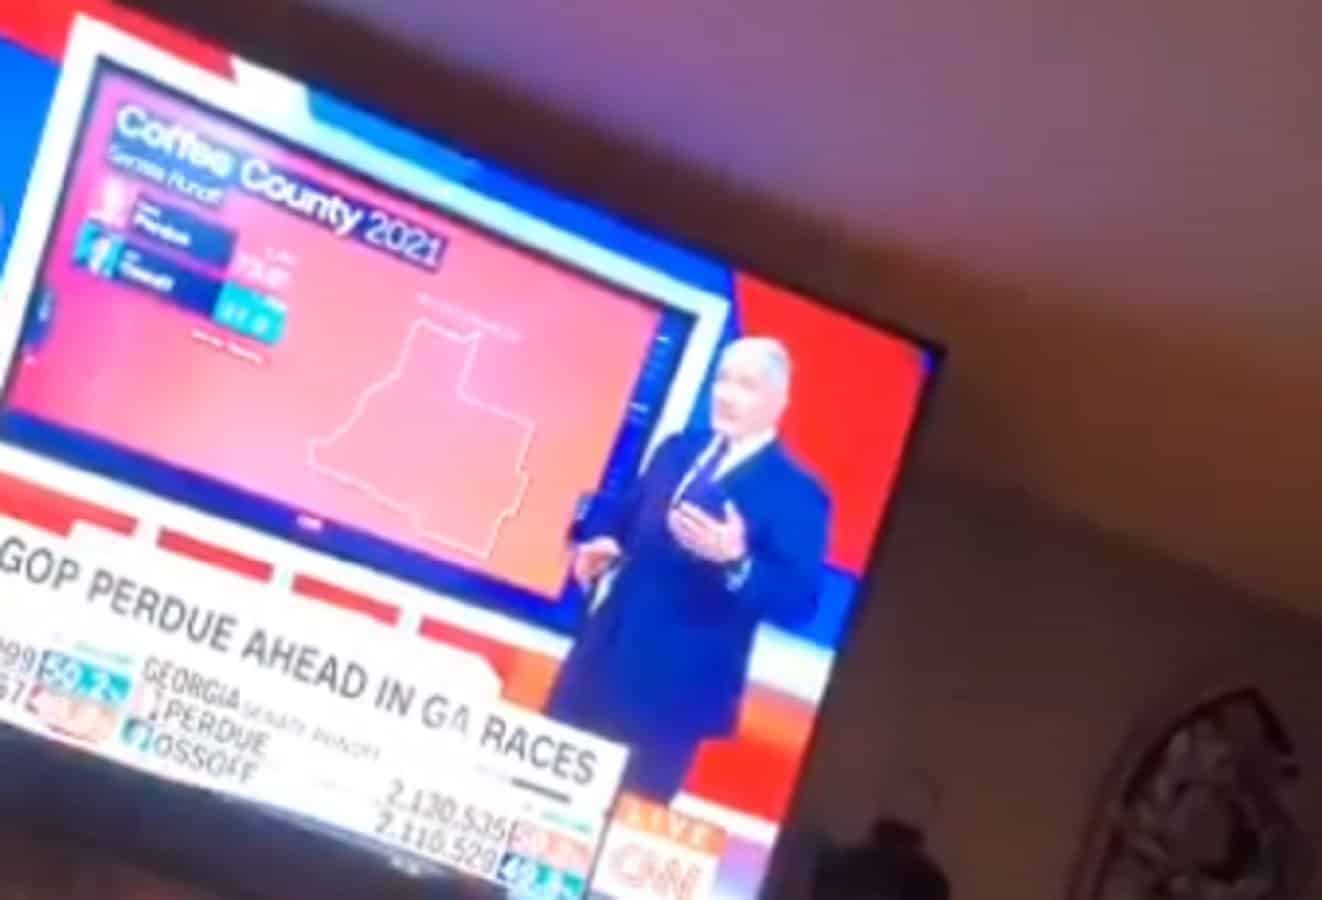 SKETCHY: CNN and ABC News Remove 5,000 Perdue Votes During
Live Broadcasts (VIDEOS) 1